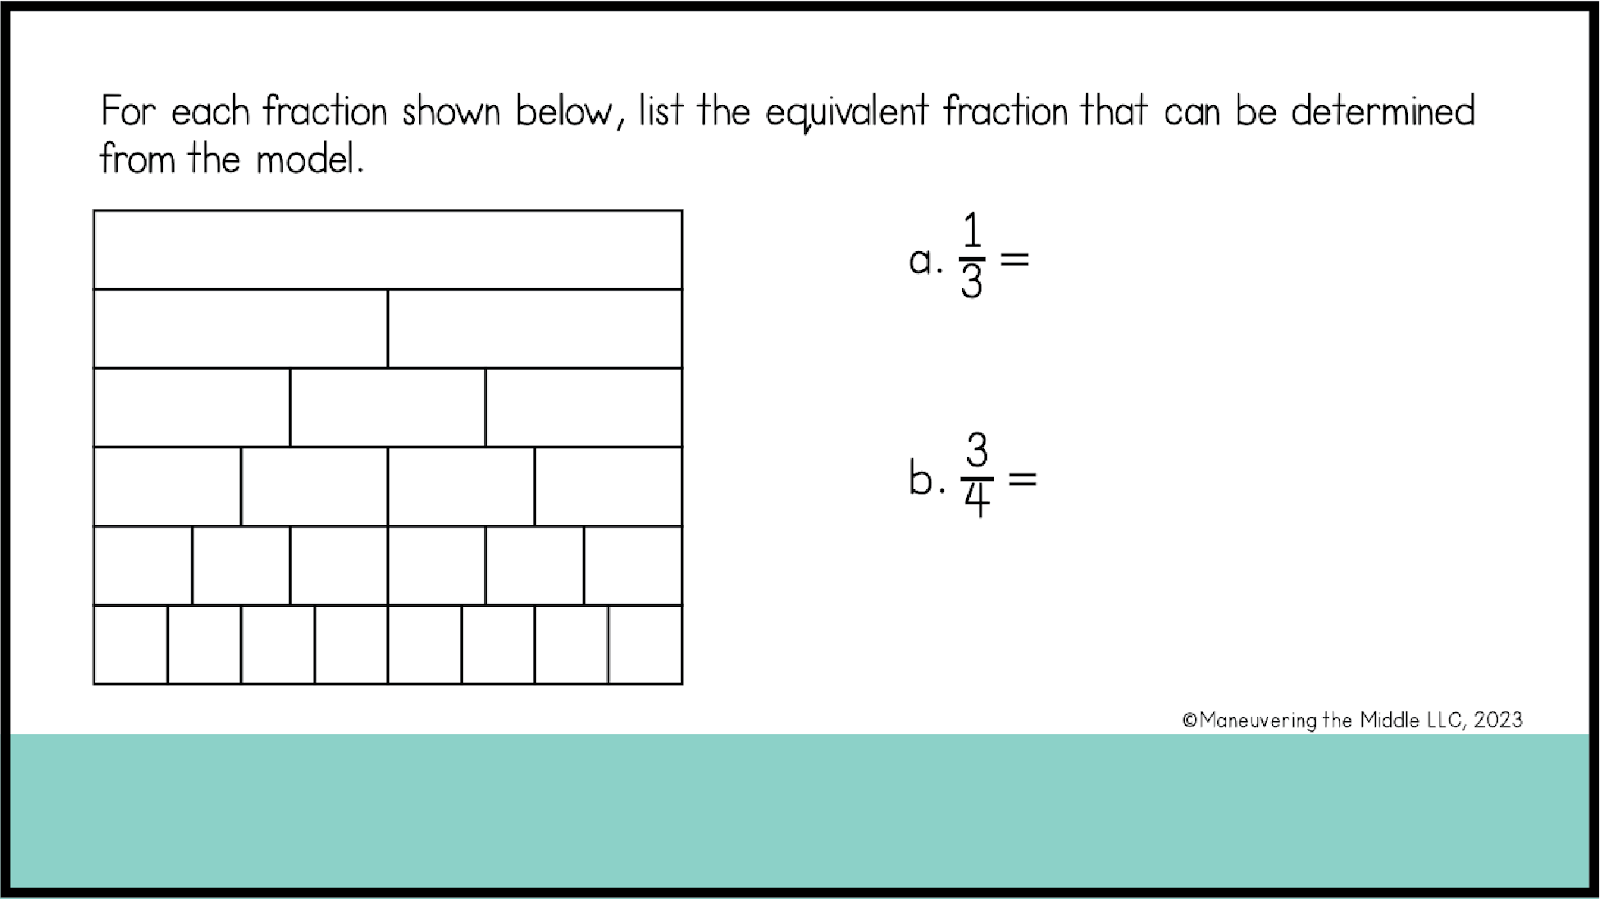 Adding and subtracting fractions using models is an excellent way to introduce fractions to 5th grade students. Learn how to do this here! | maneuveringthemiddle.com